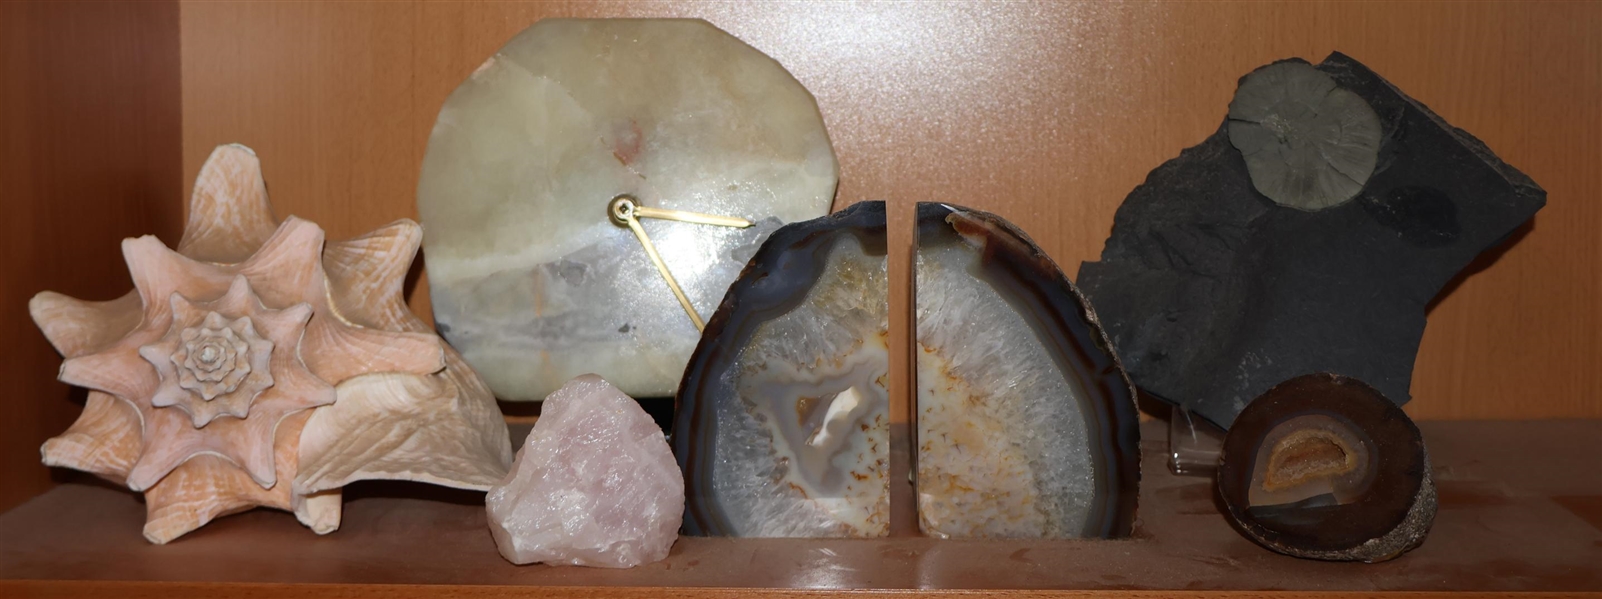 Collection of Rock, Fossil, and Shell Specimens - Book Ends, Clock, Agate, Quartz, and Large Shell - Clock Measures 8" Across, Fossil Rock Measures 8" Across